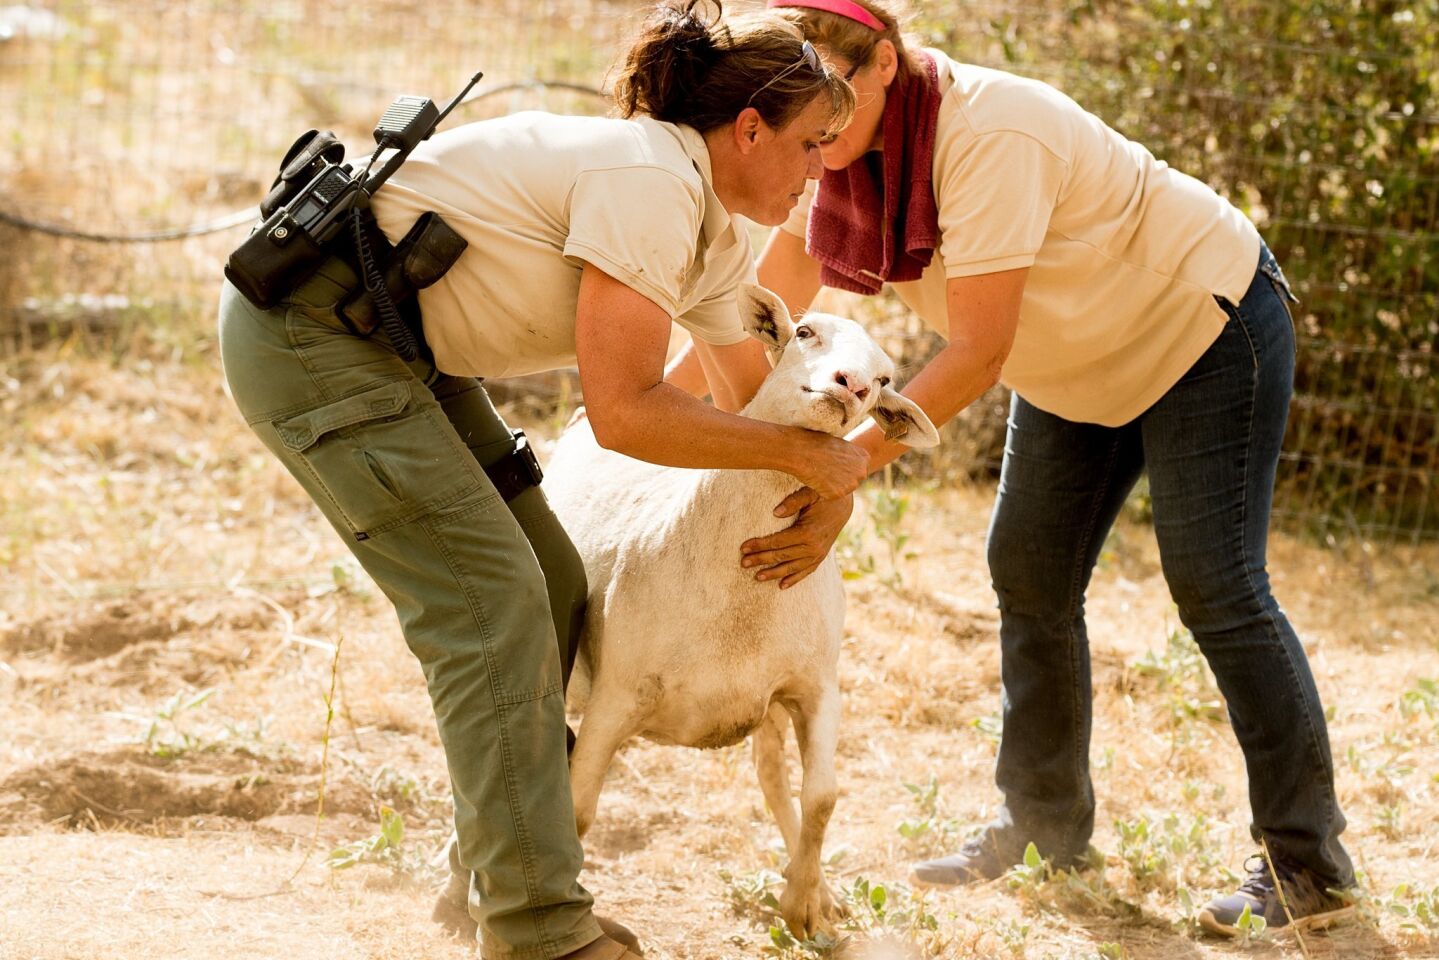 Animal control officers struggle on July 17 with a sheep while trying to evacuate the animal as the Detwiller fire burns nearby in Bear Valley.